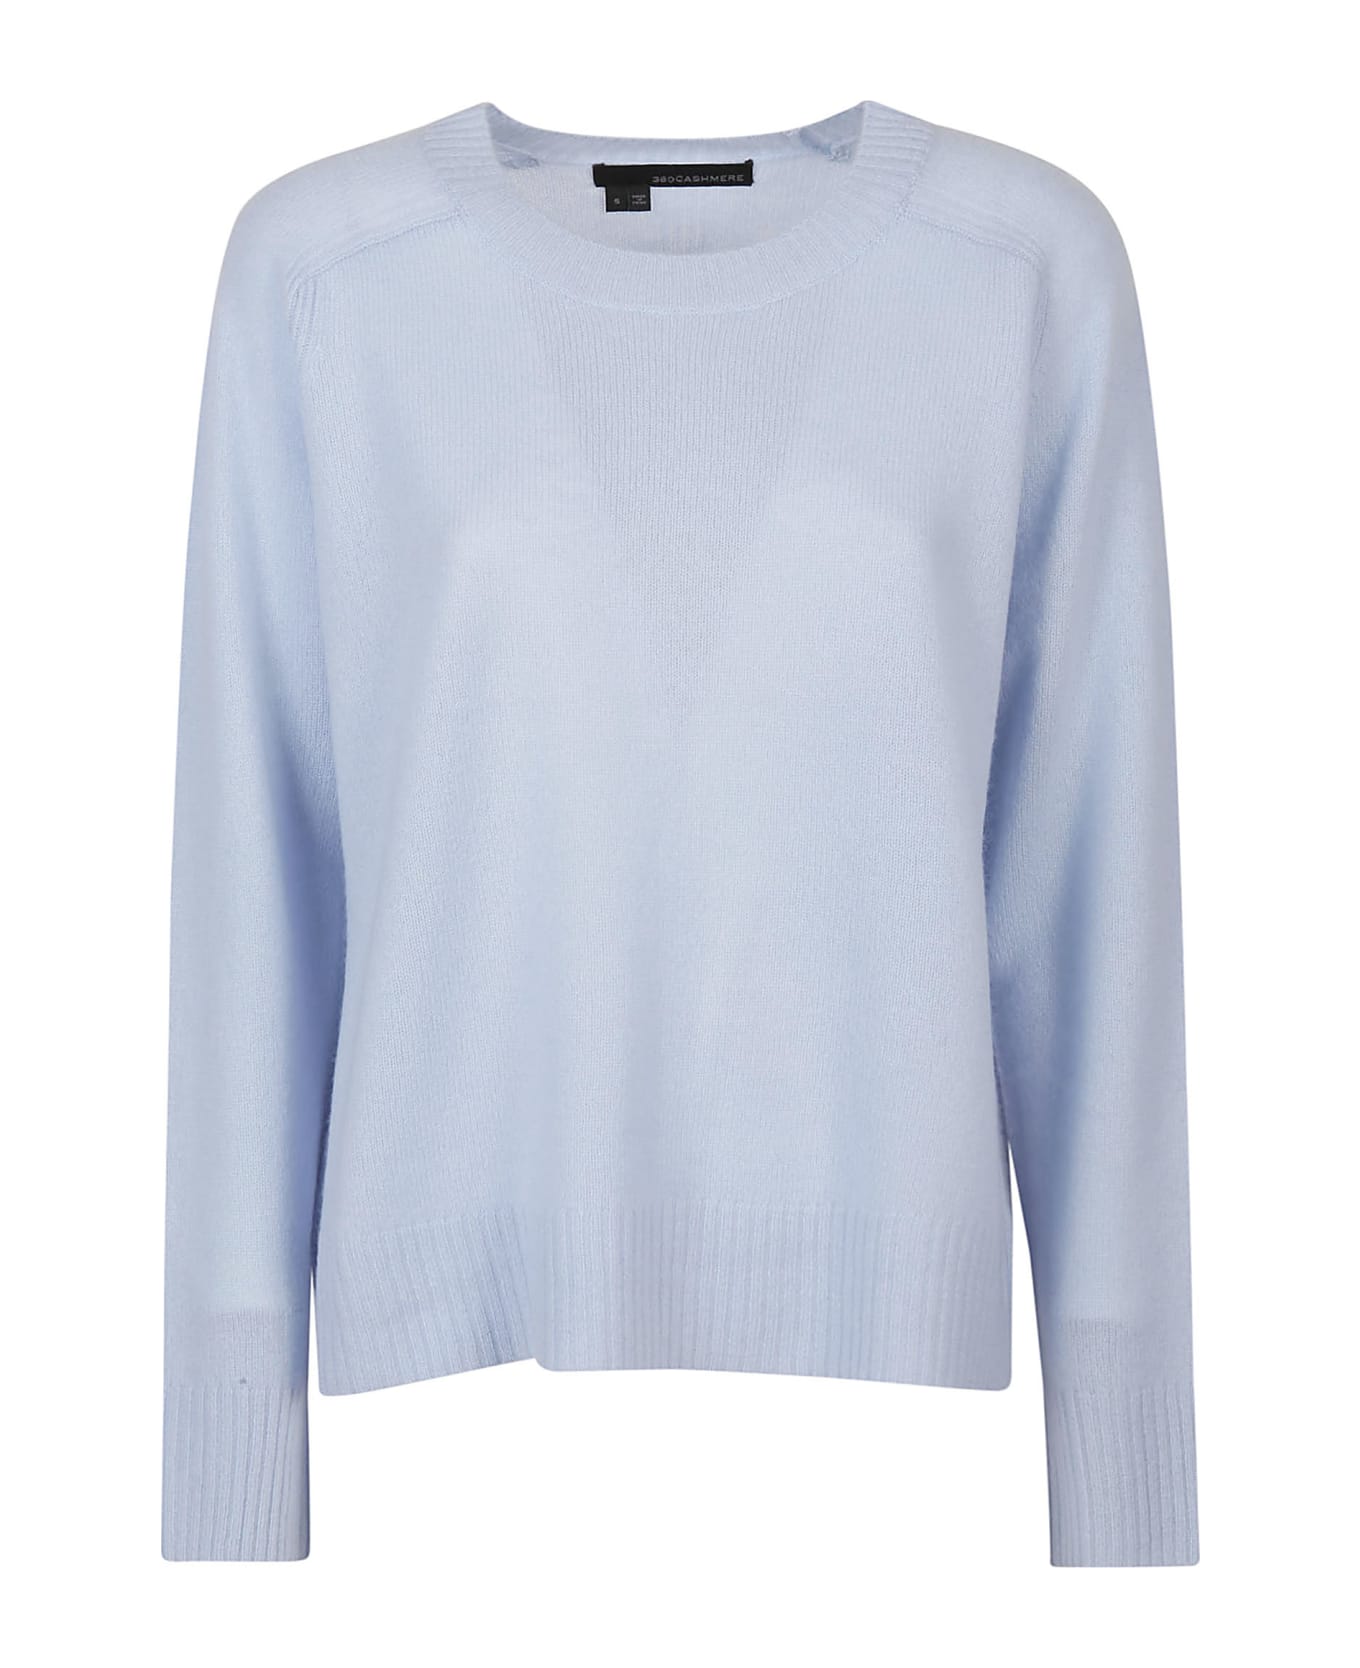 360Cashmere Taylor Round Neck Sweater - Chambray